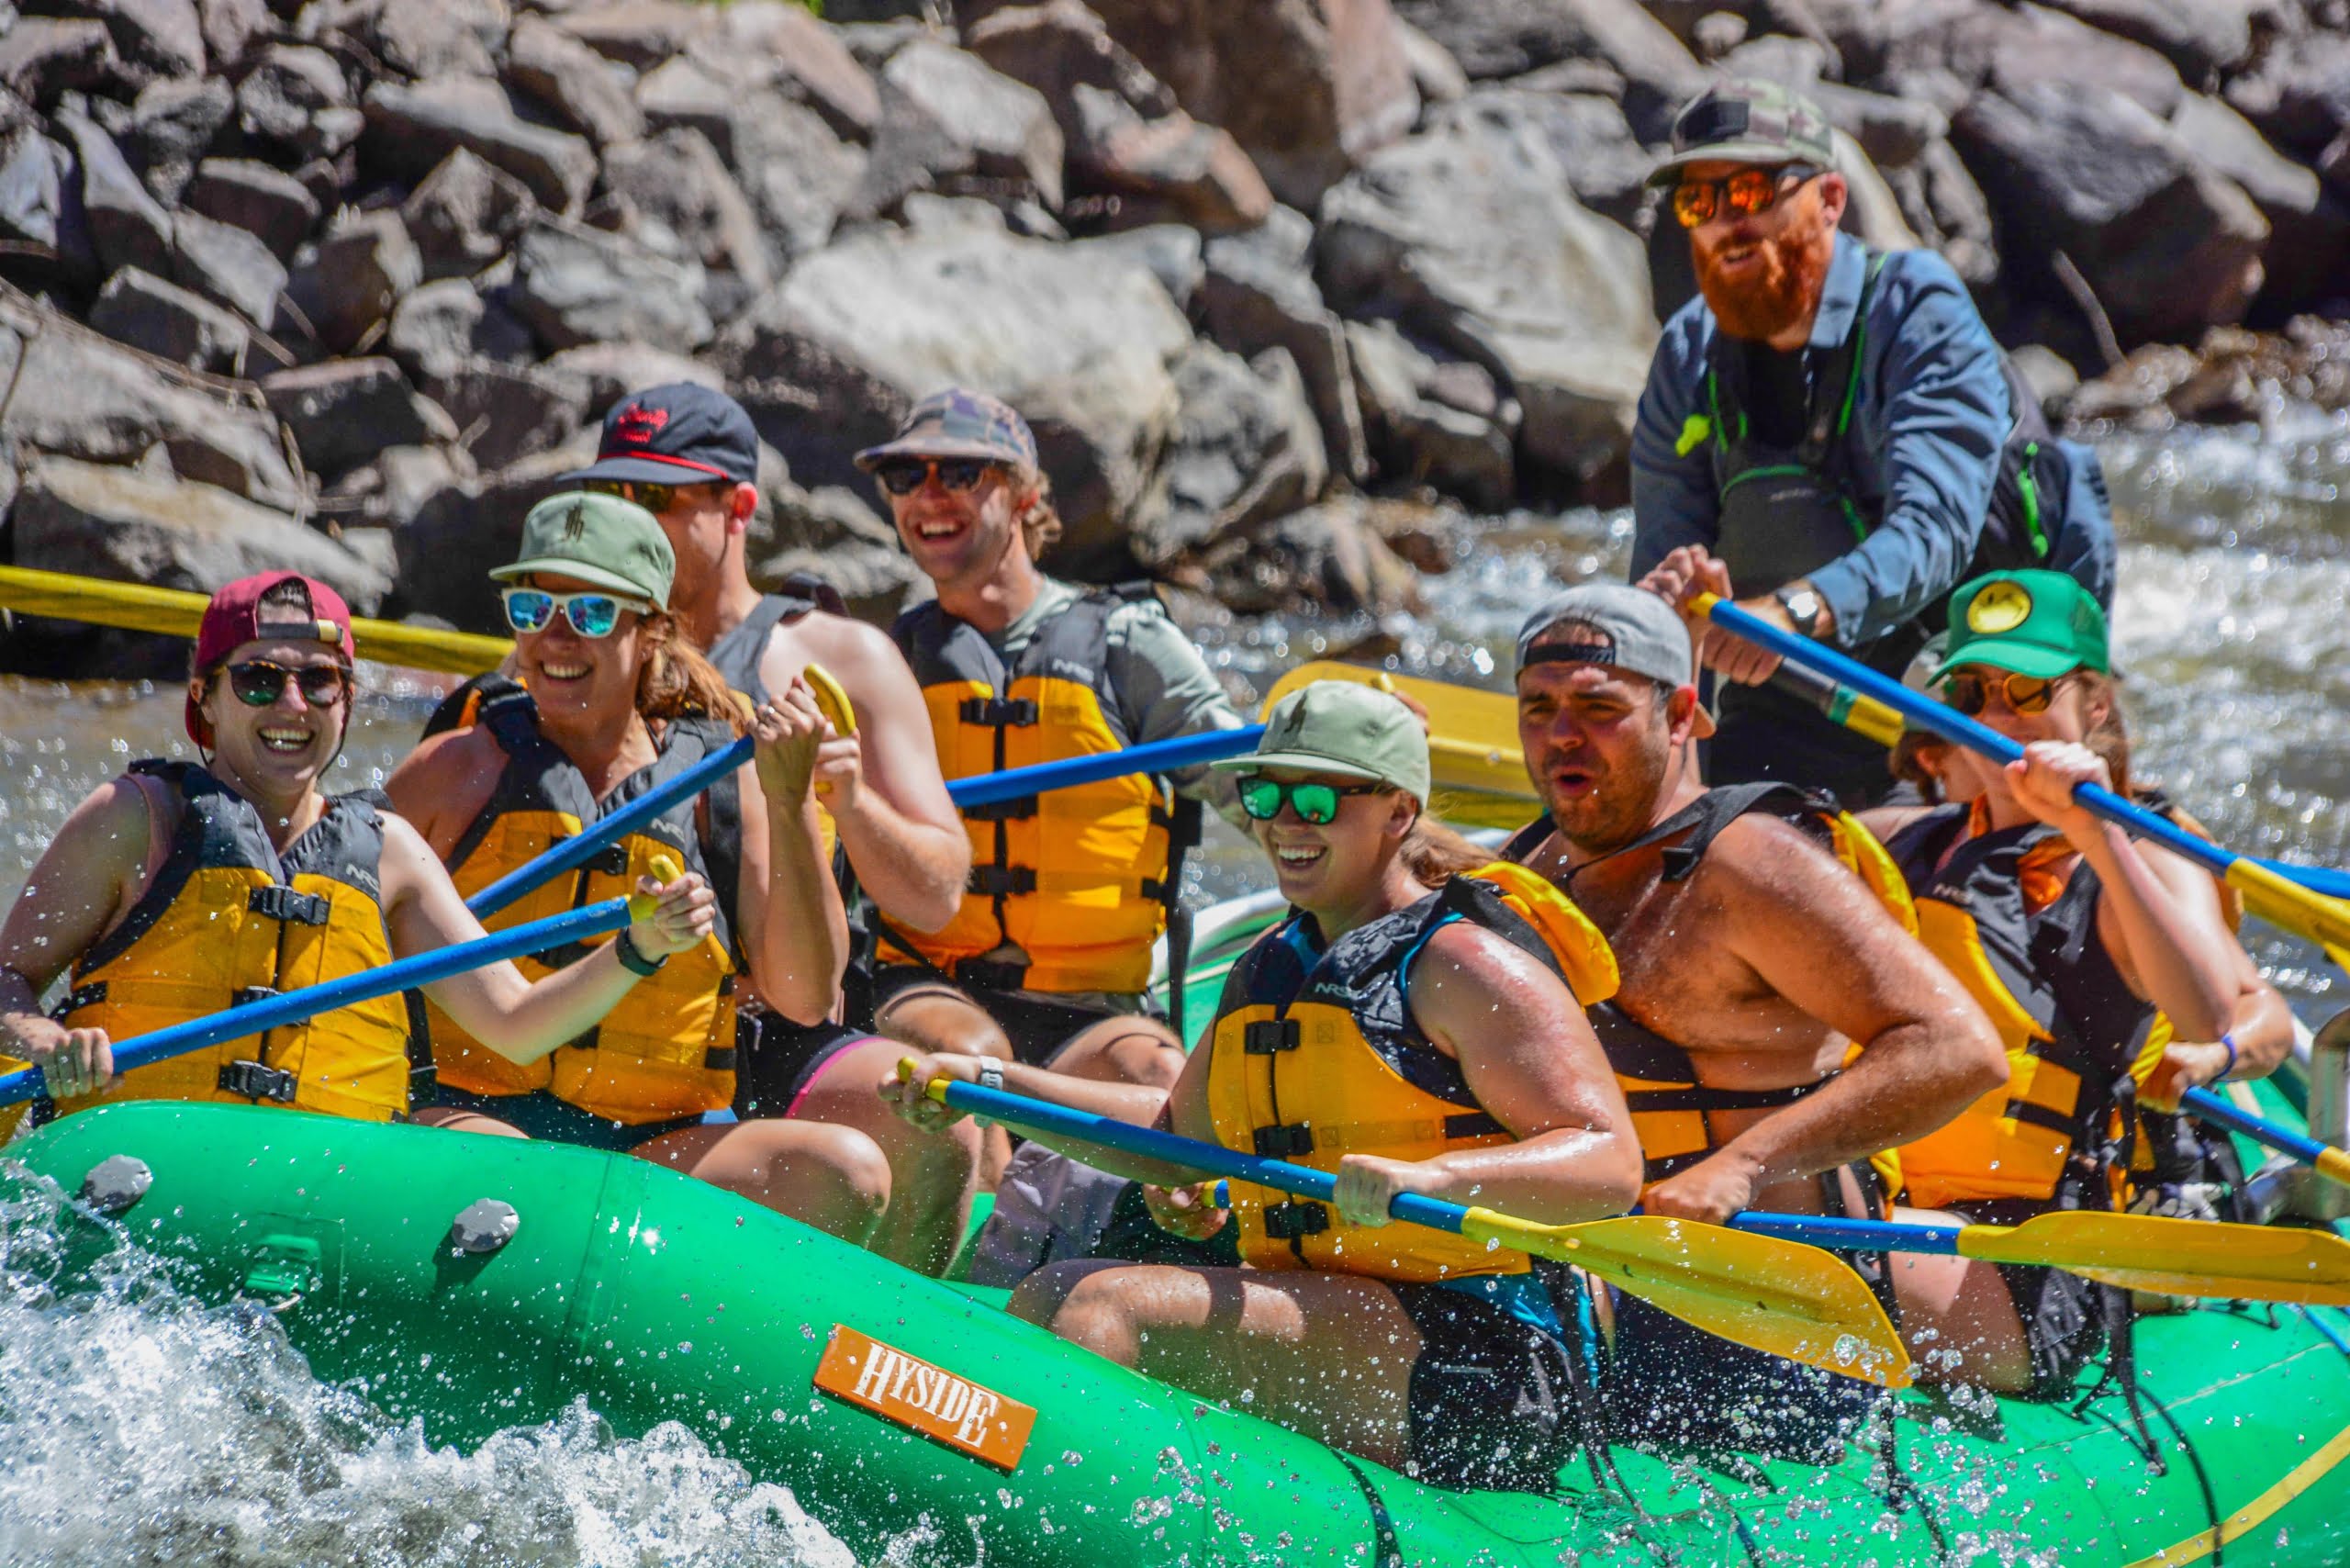 Group Rafting near Vail on the Colorado River